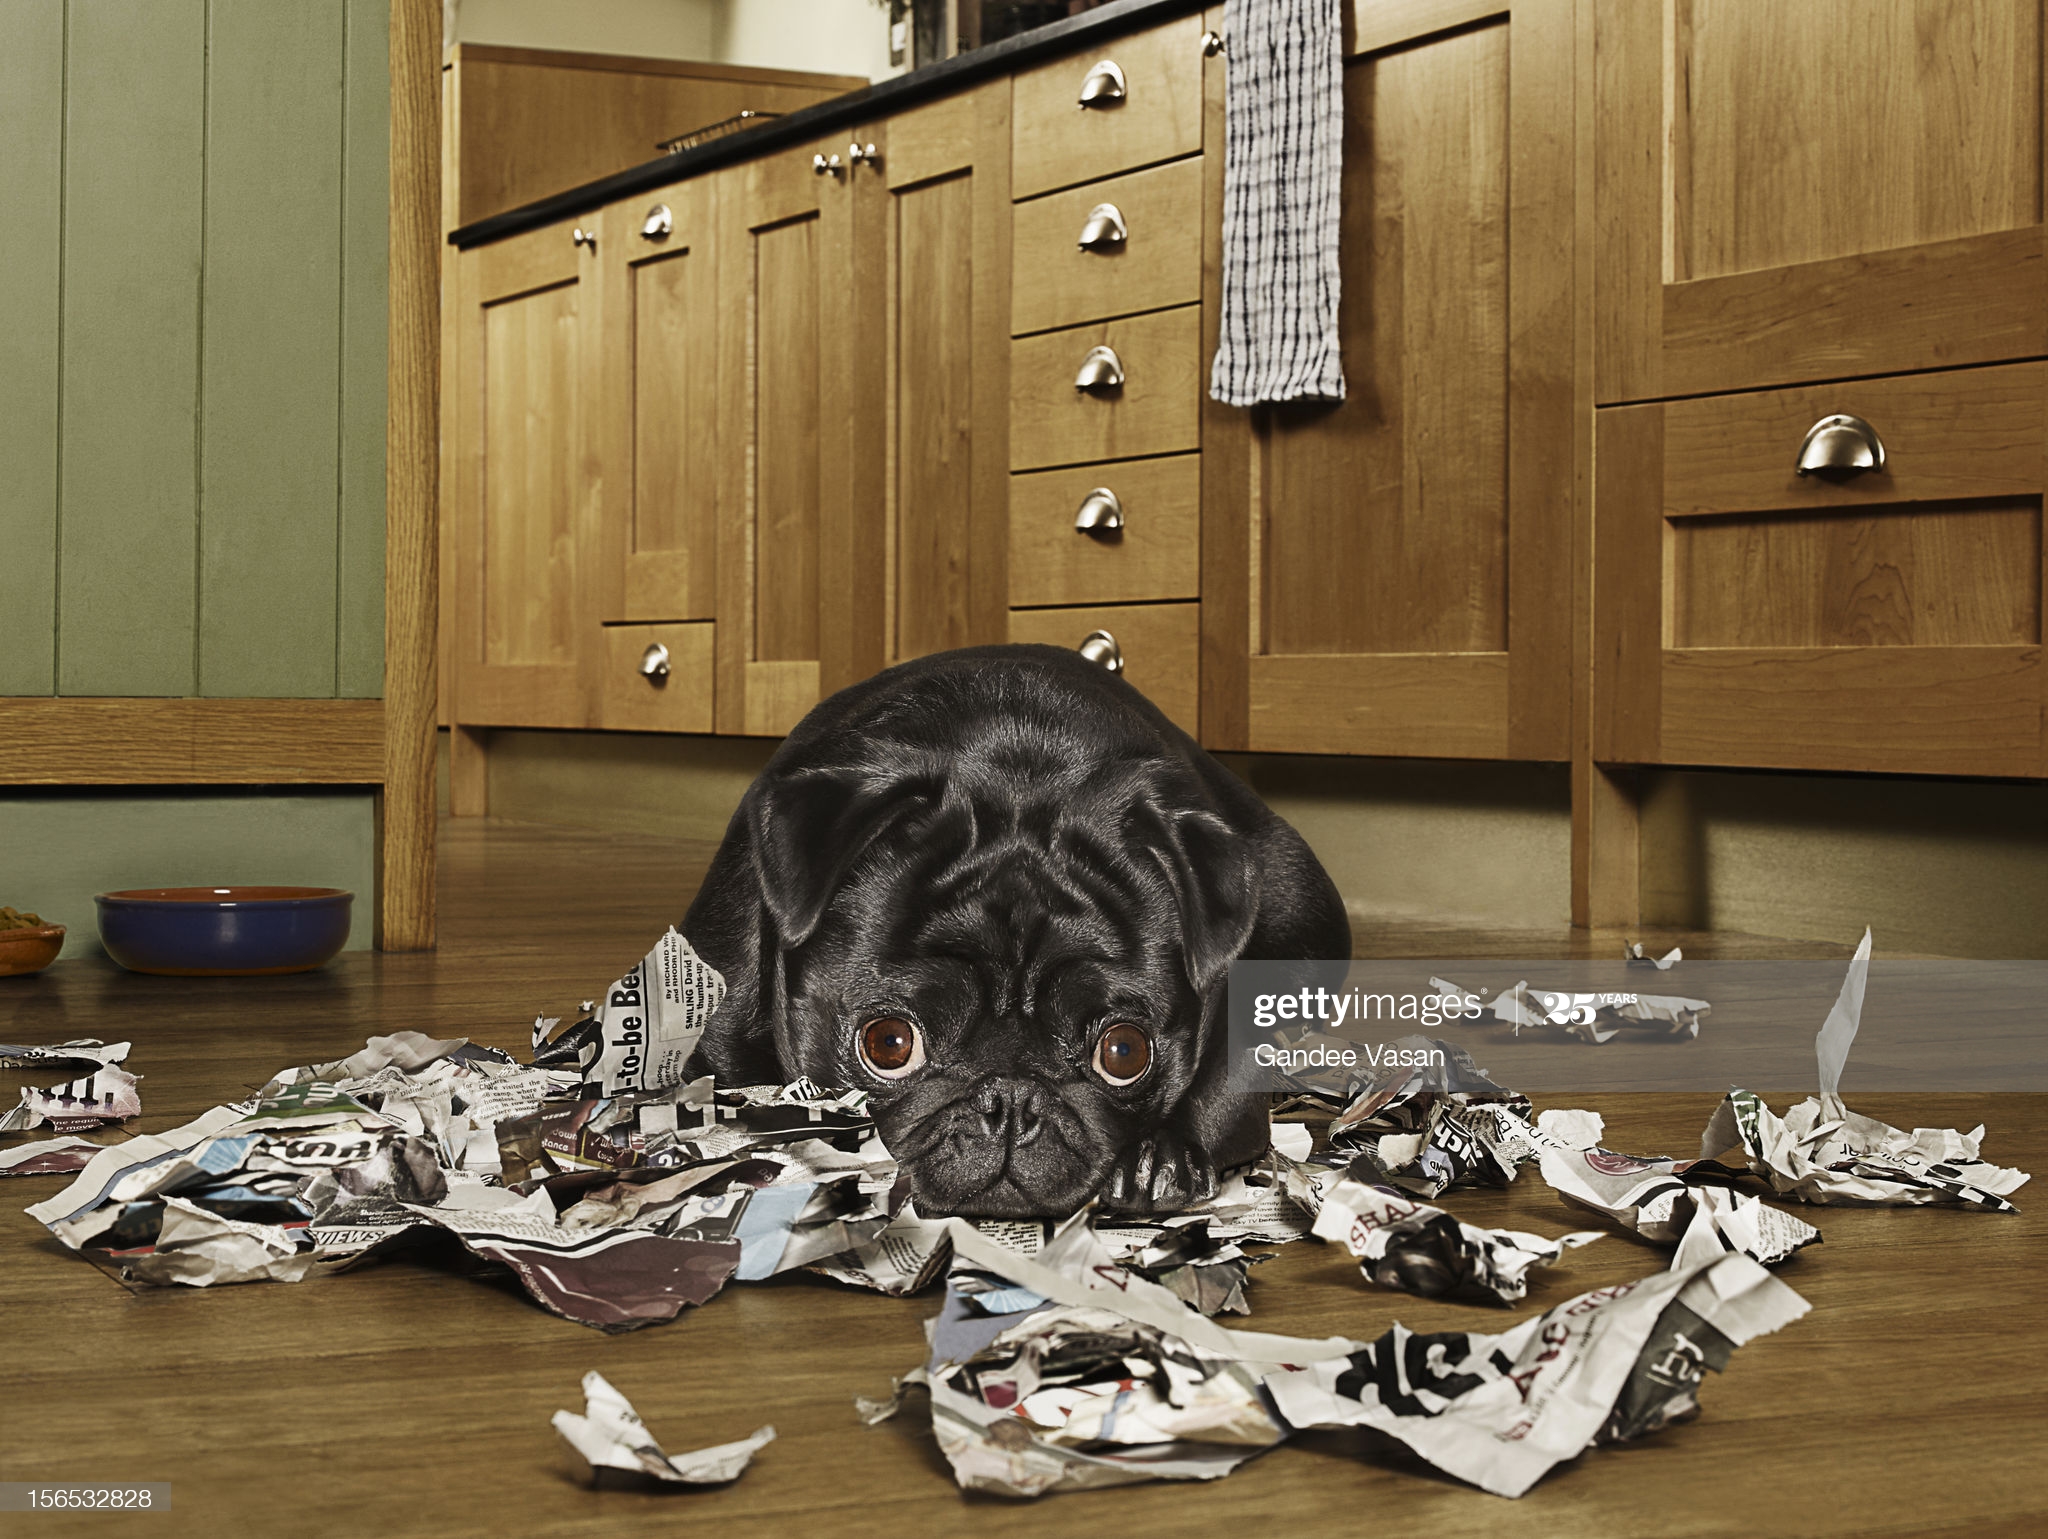 Dog (Black Pug) looking guilty after tearing up newspaper in the kitchen